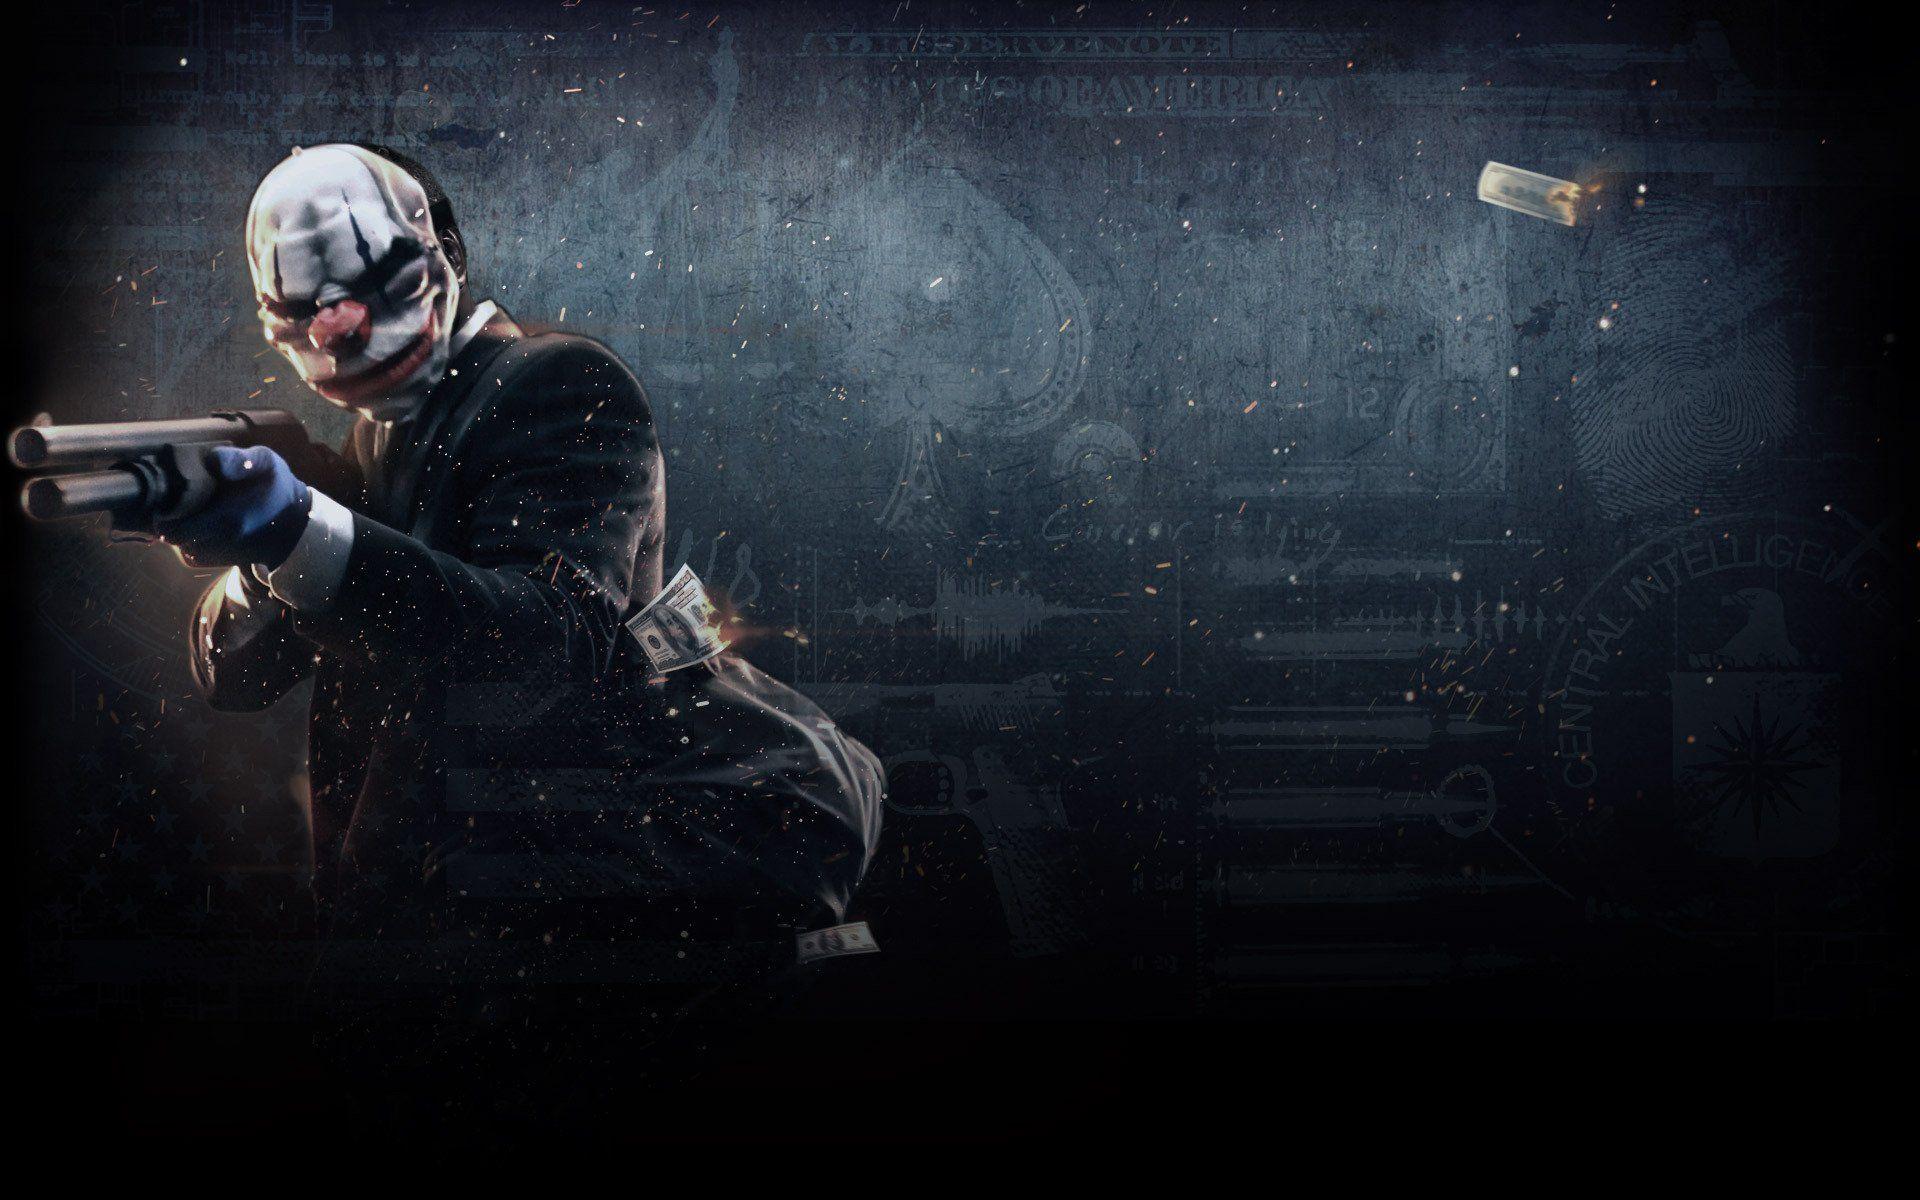 Payday 2 Wallpapers Wallpaper Cave